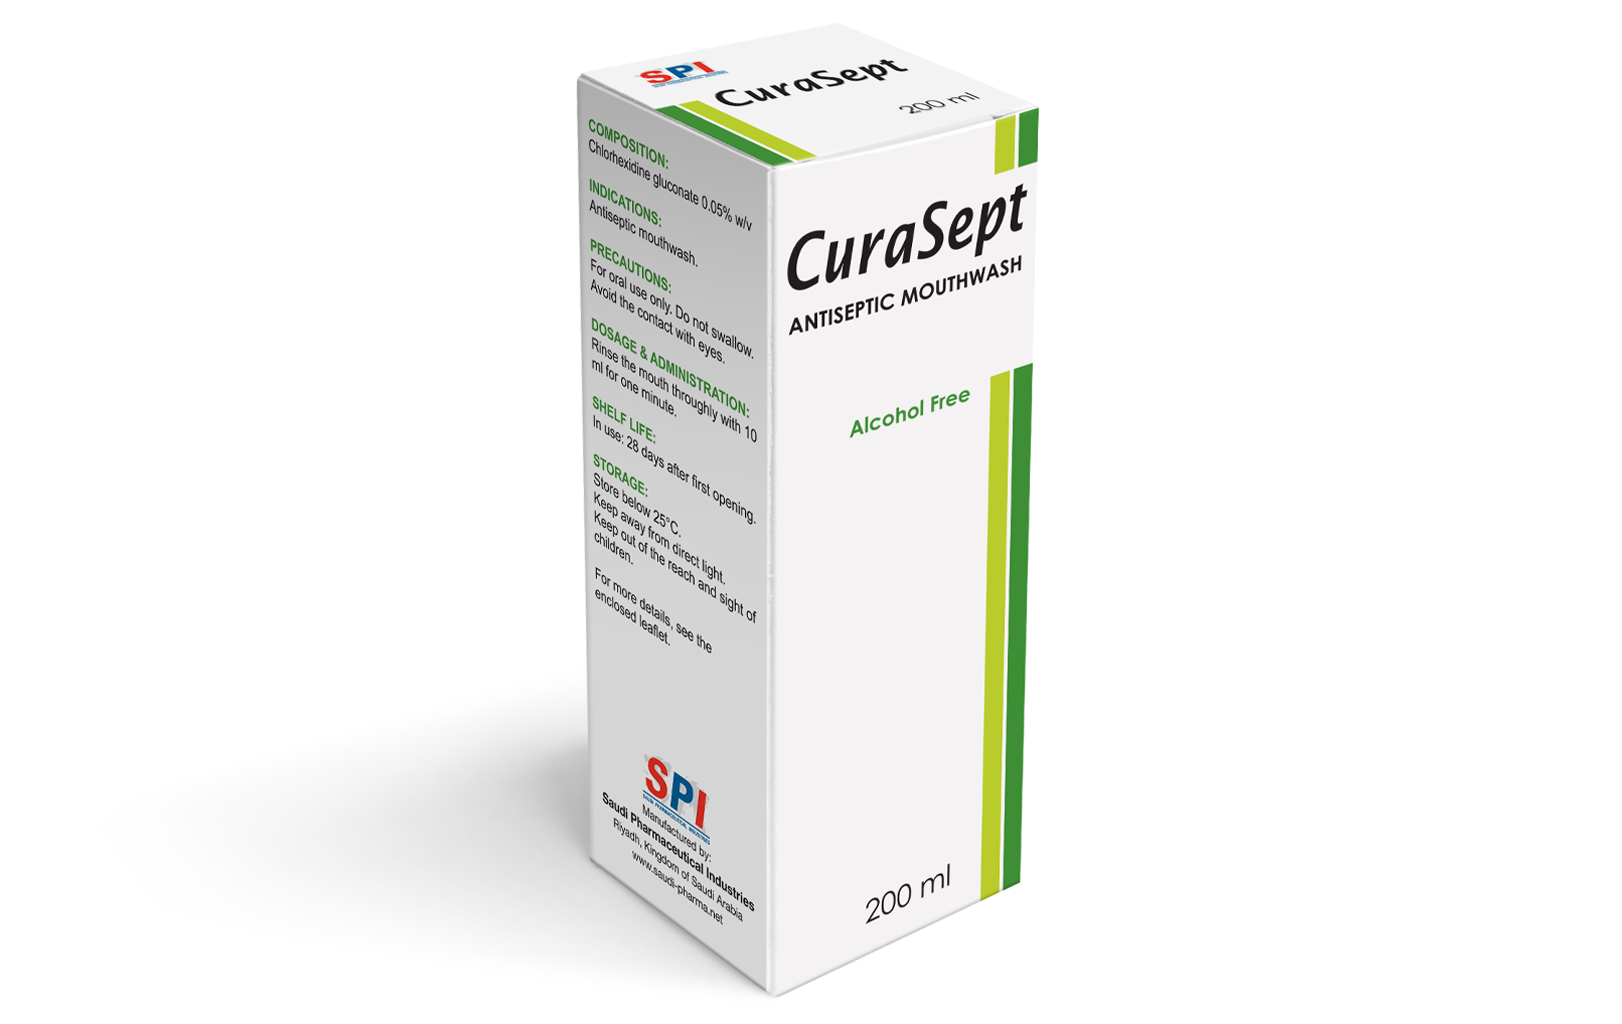 Curasept anitseptic mouth wash